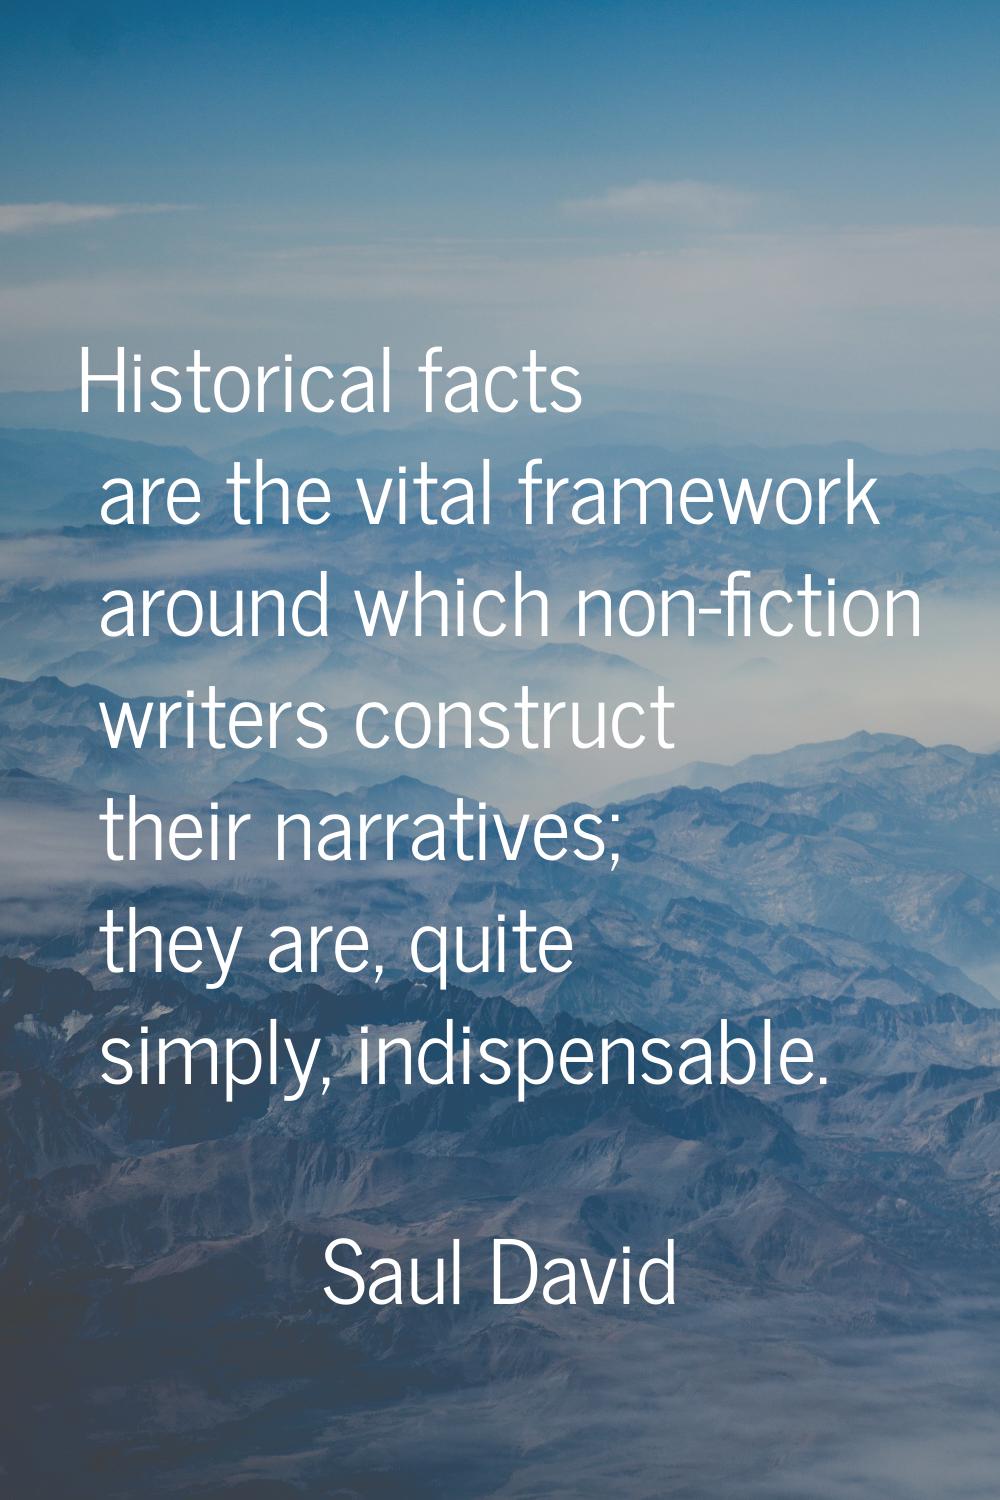 Historical facts are the vital framework around which non-fiction writers construct their narrative